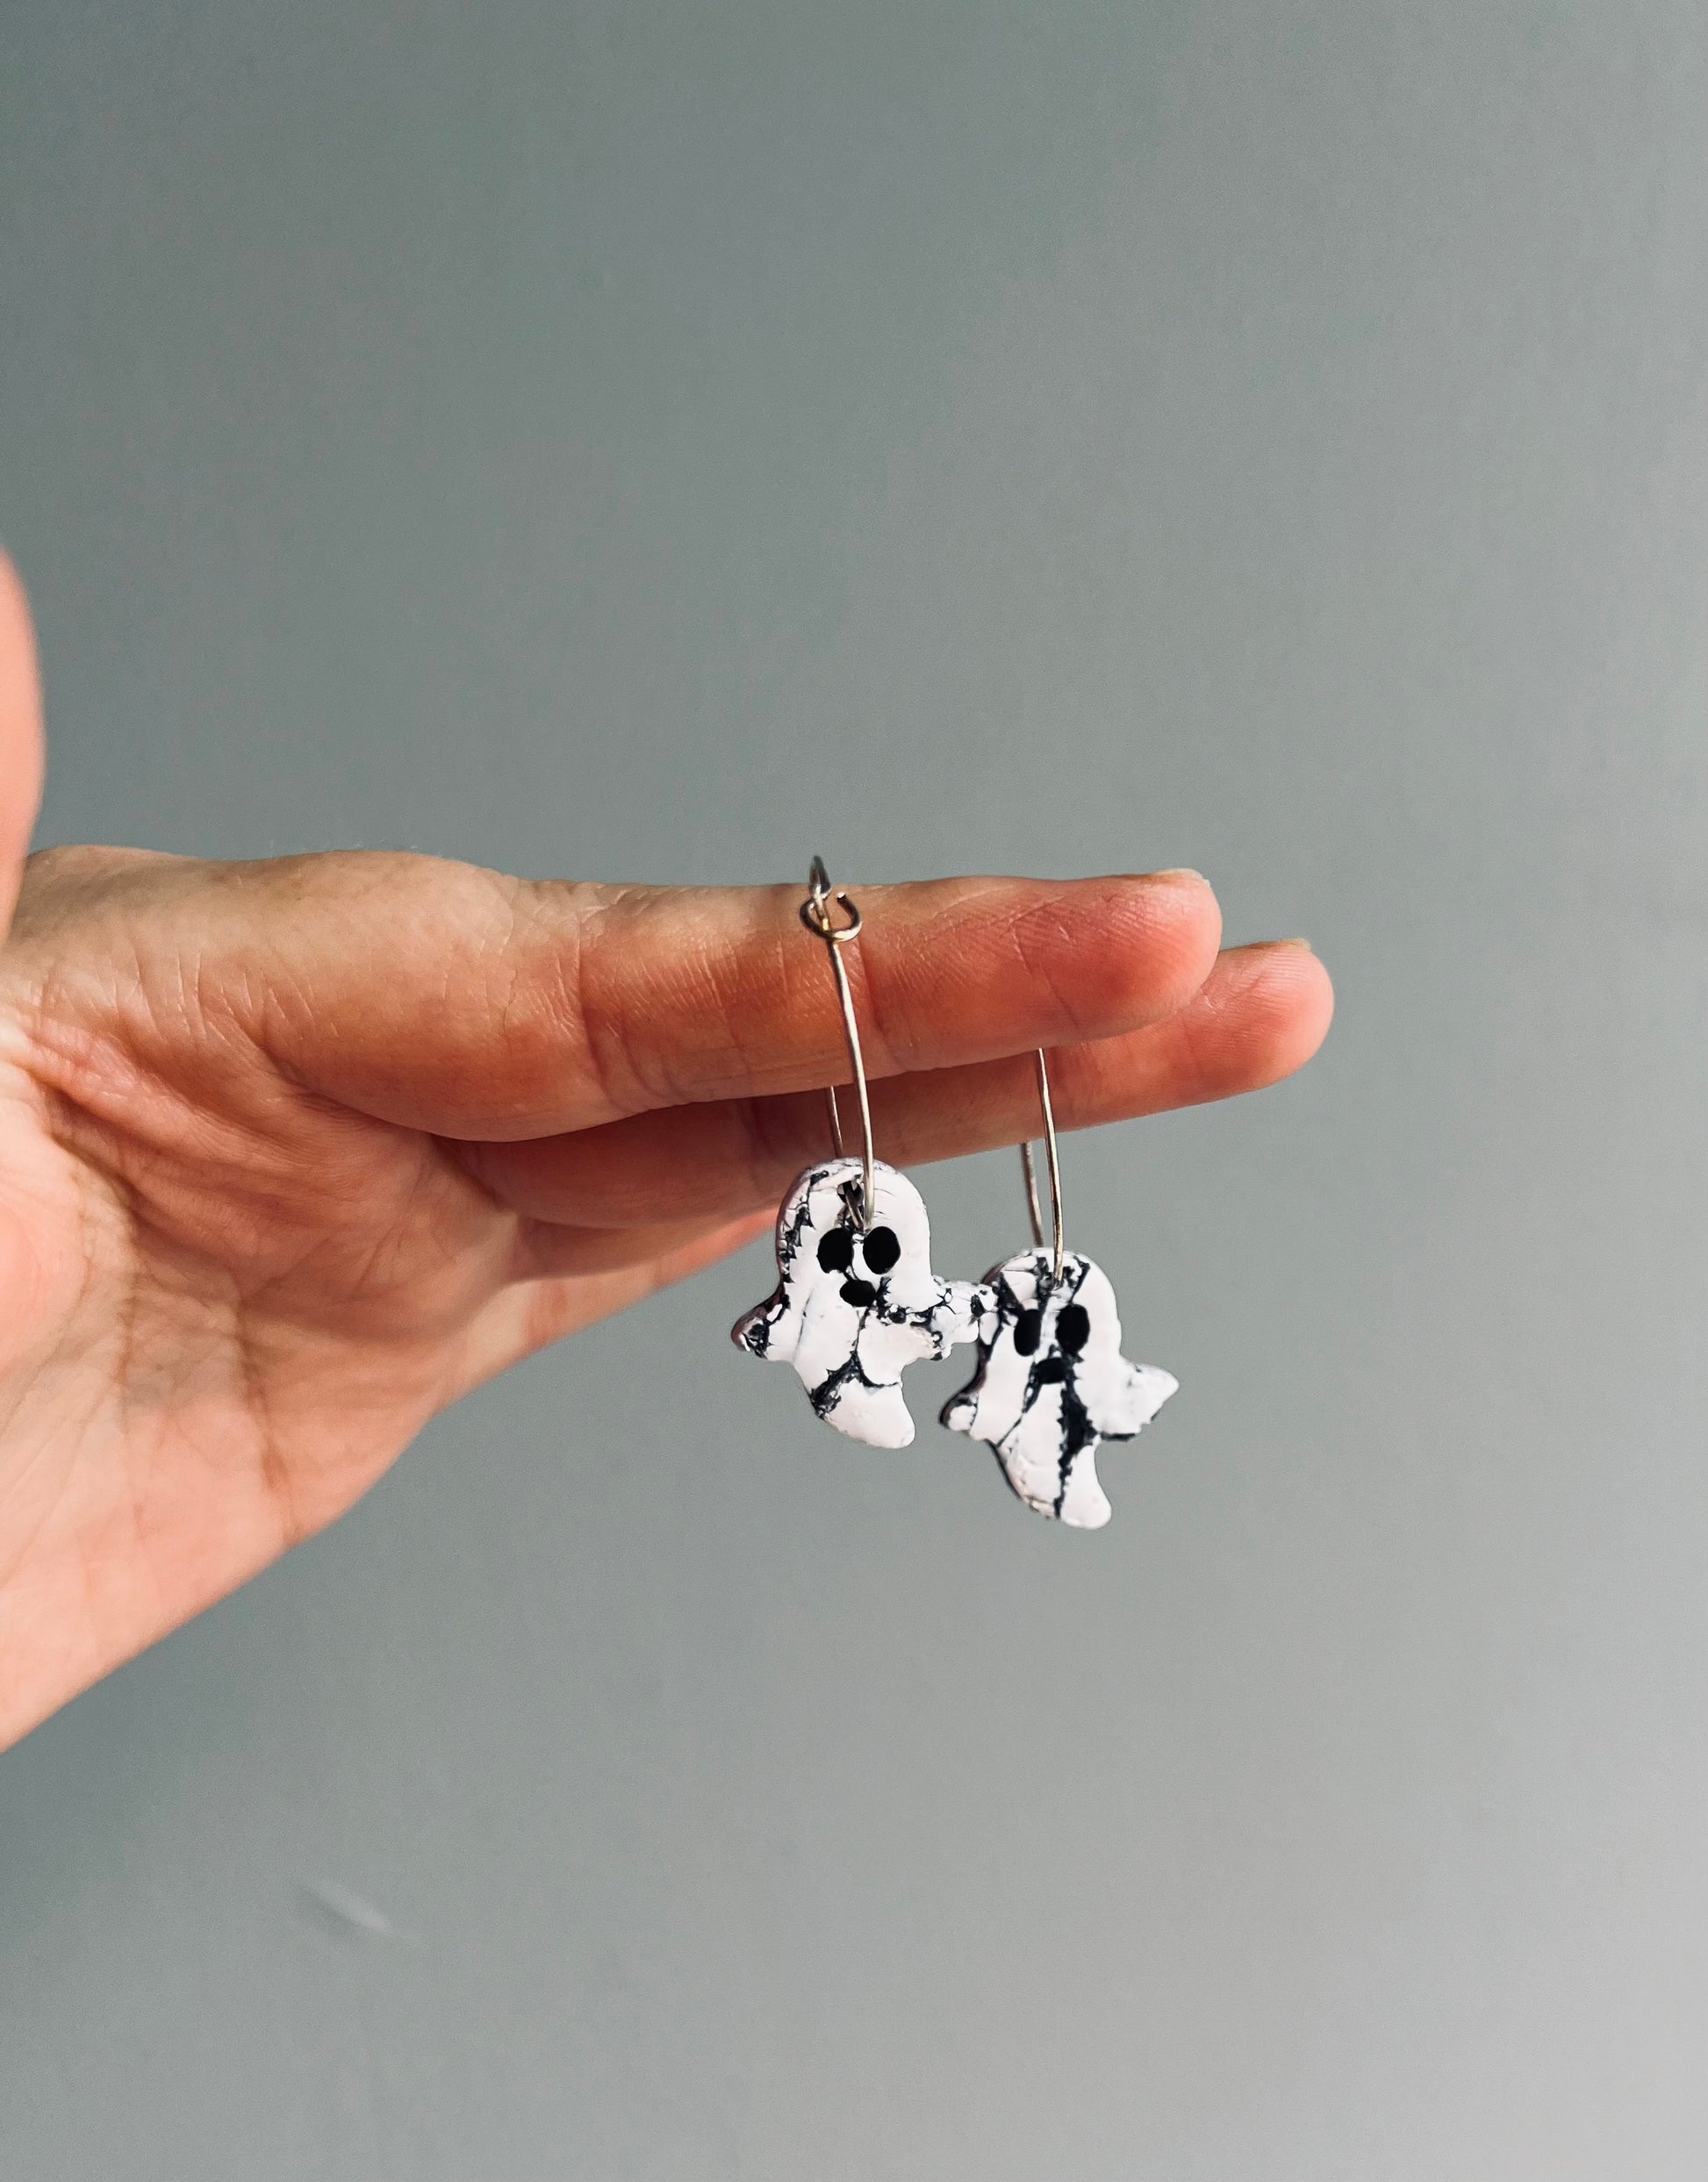 Add a whimsical flair to your style with our polymer clay ghost earrings, a fun accessory for embracing the spirit of Halloween year round!